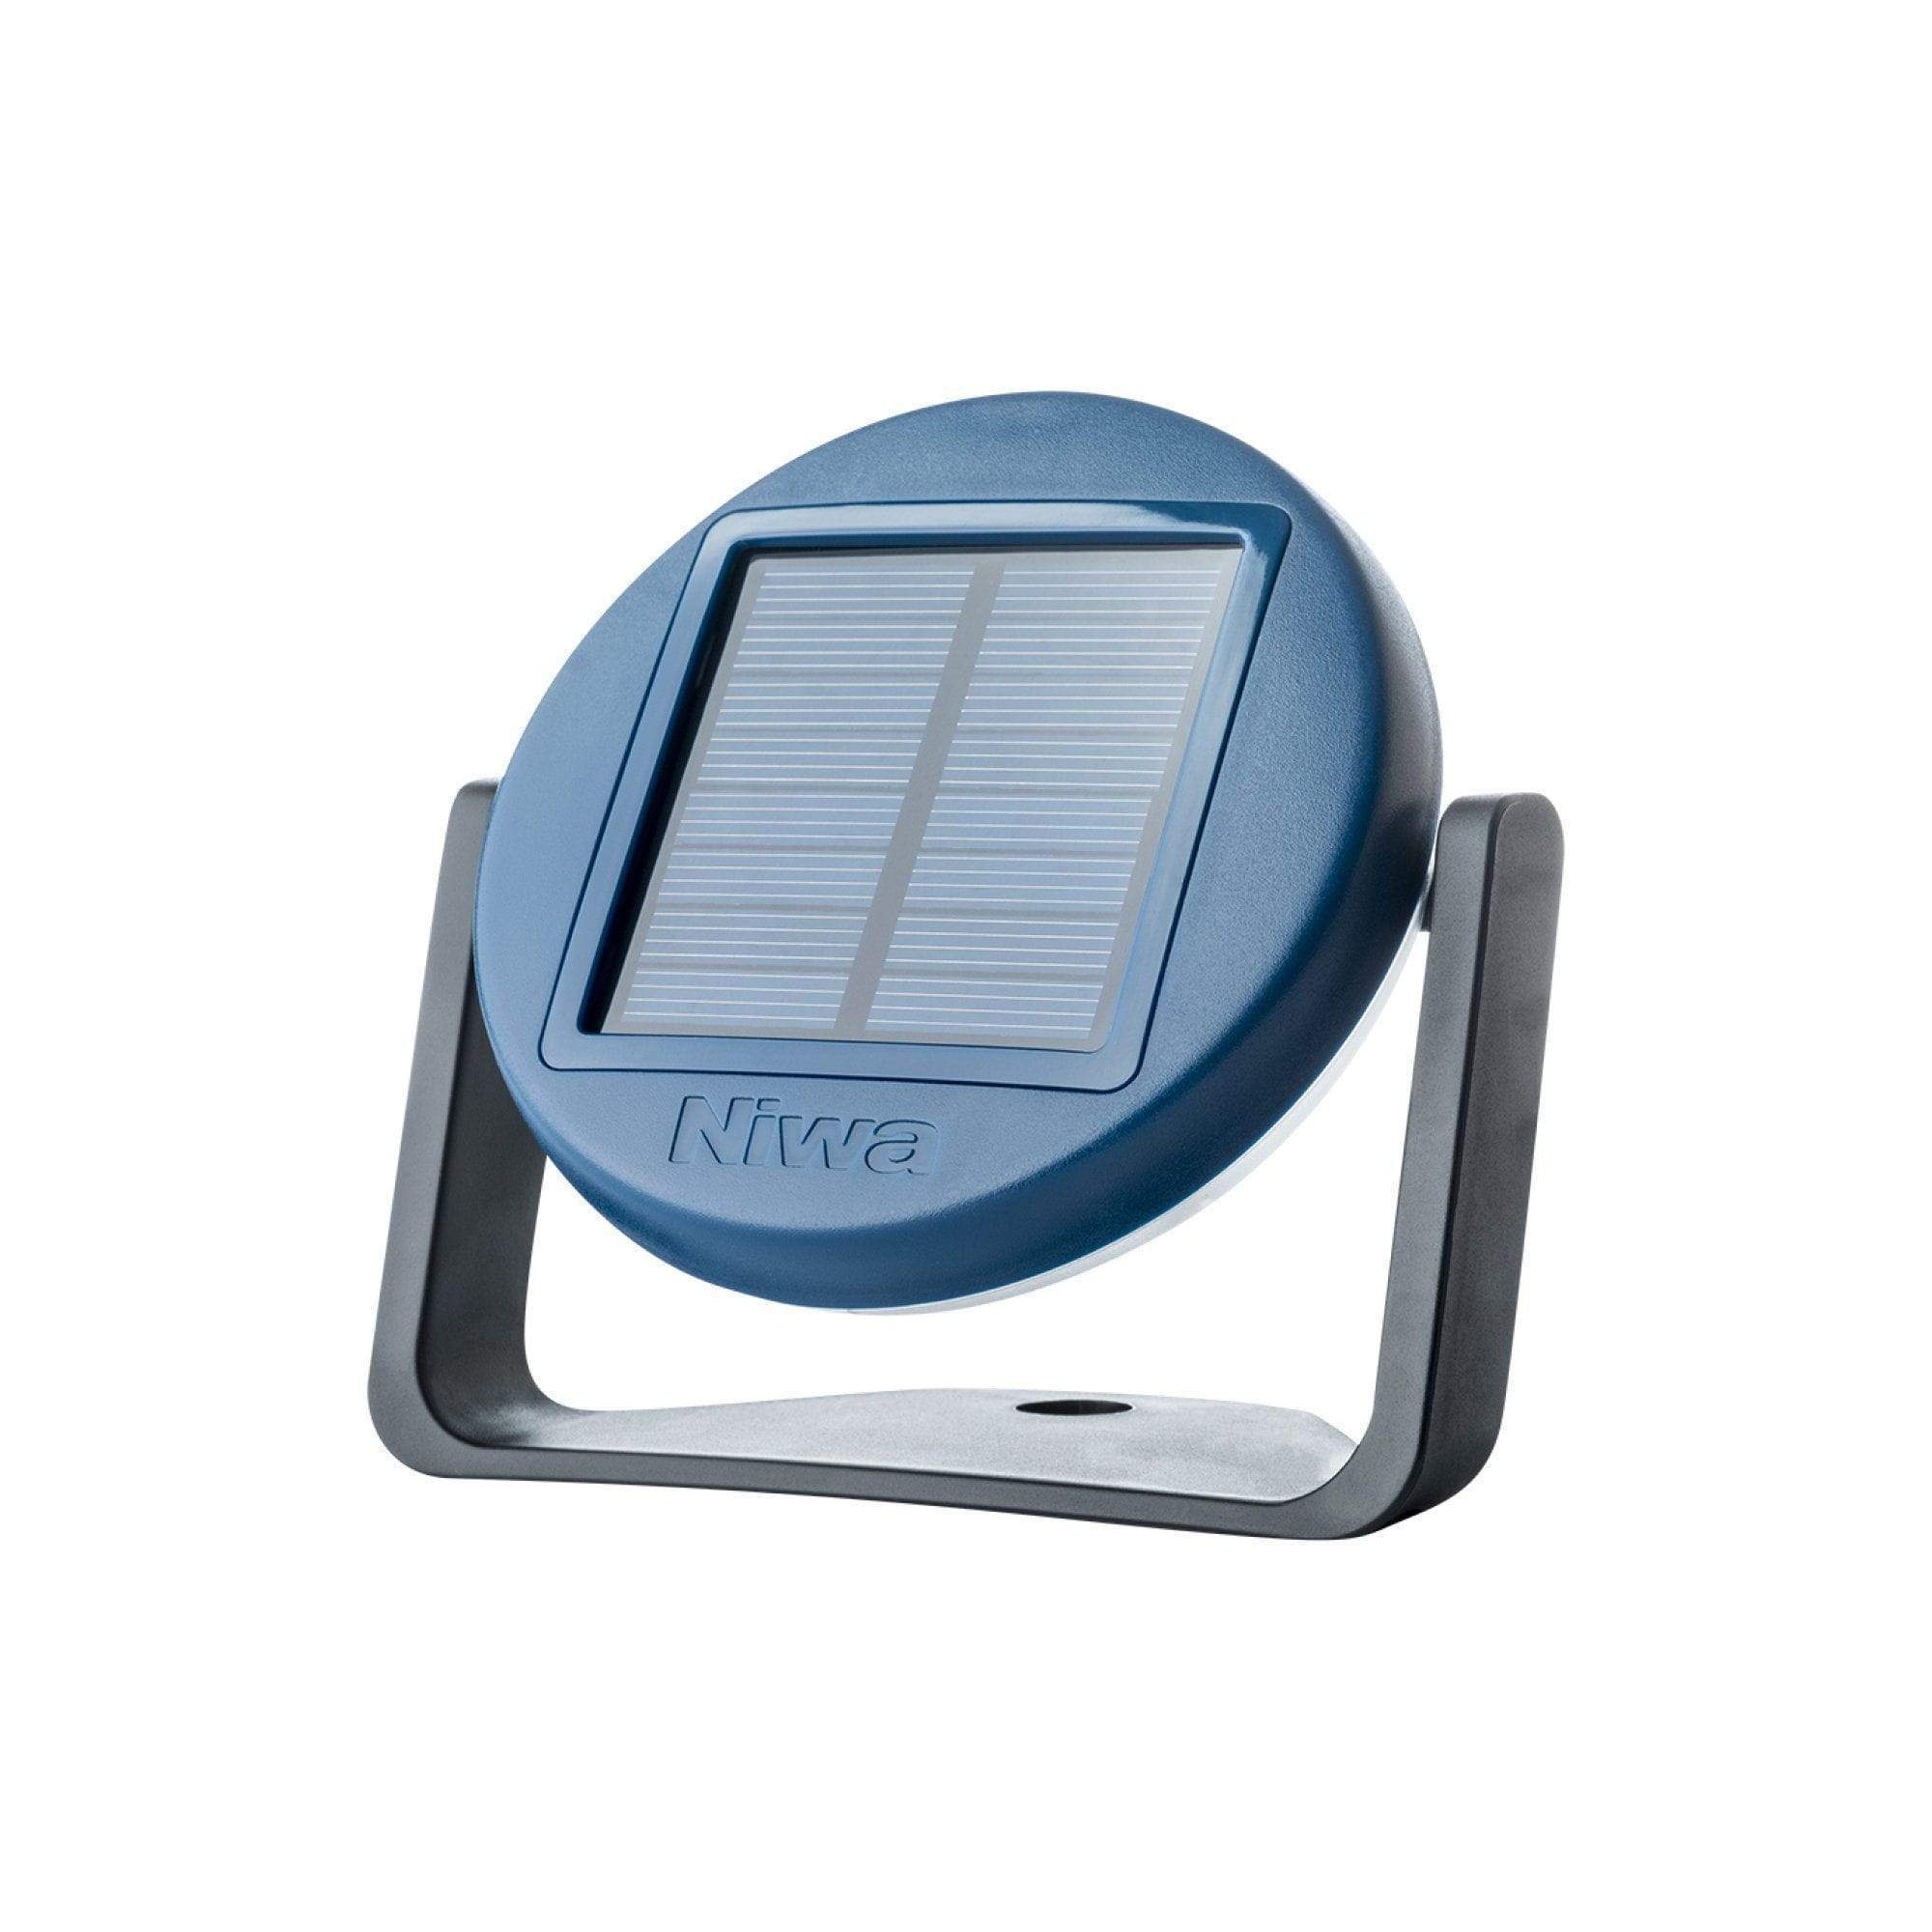 The Best Solar Lamps in 2021